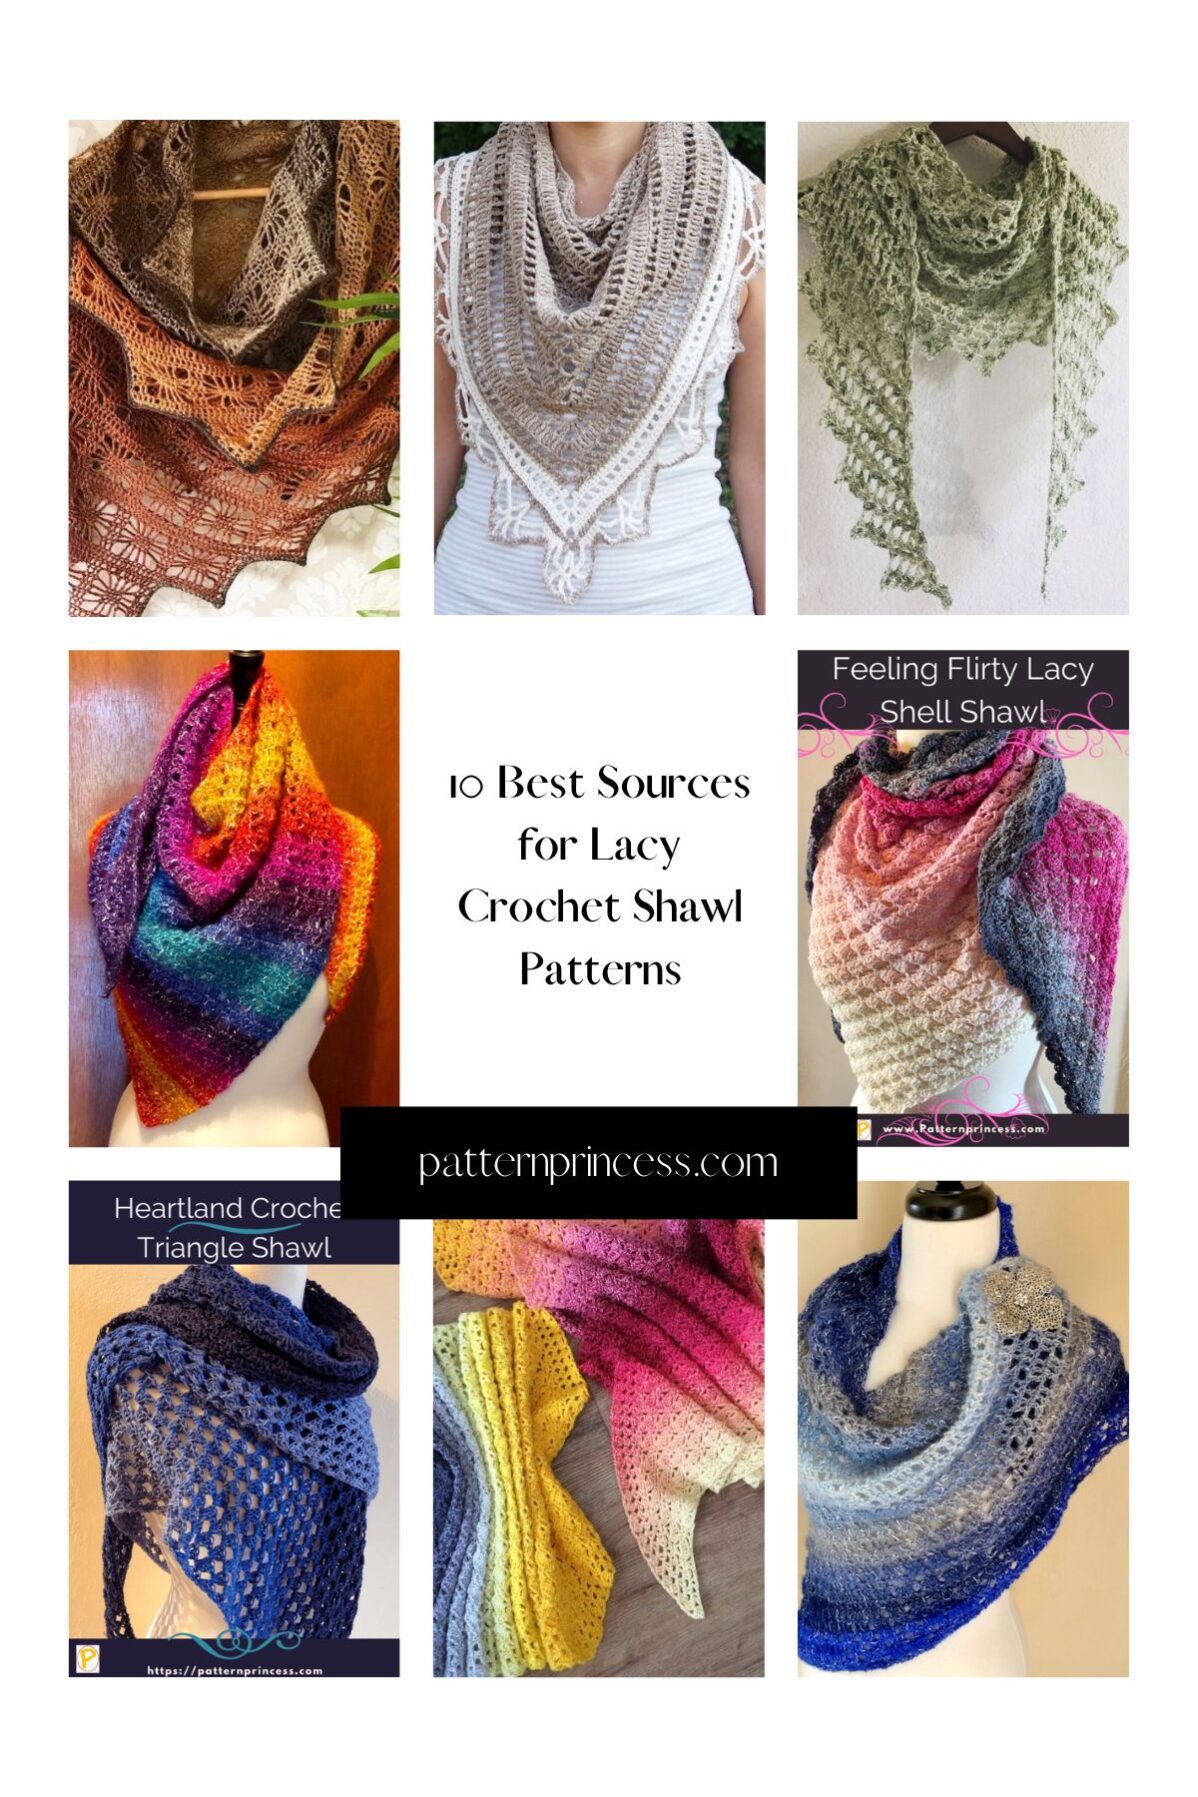 10 Best Sources for Lacy Crochet Shawl Patterns